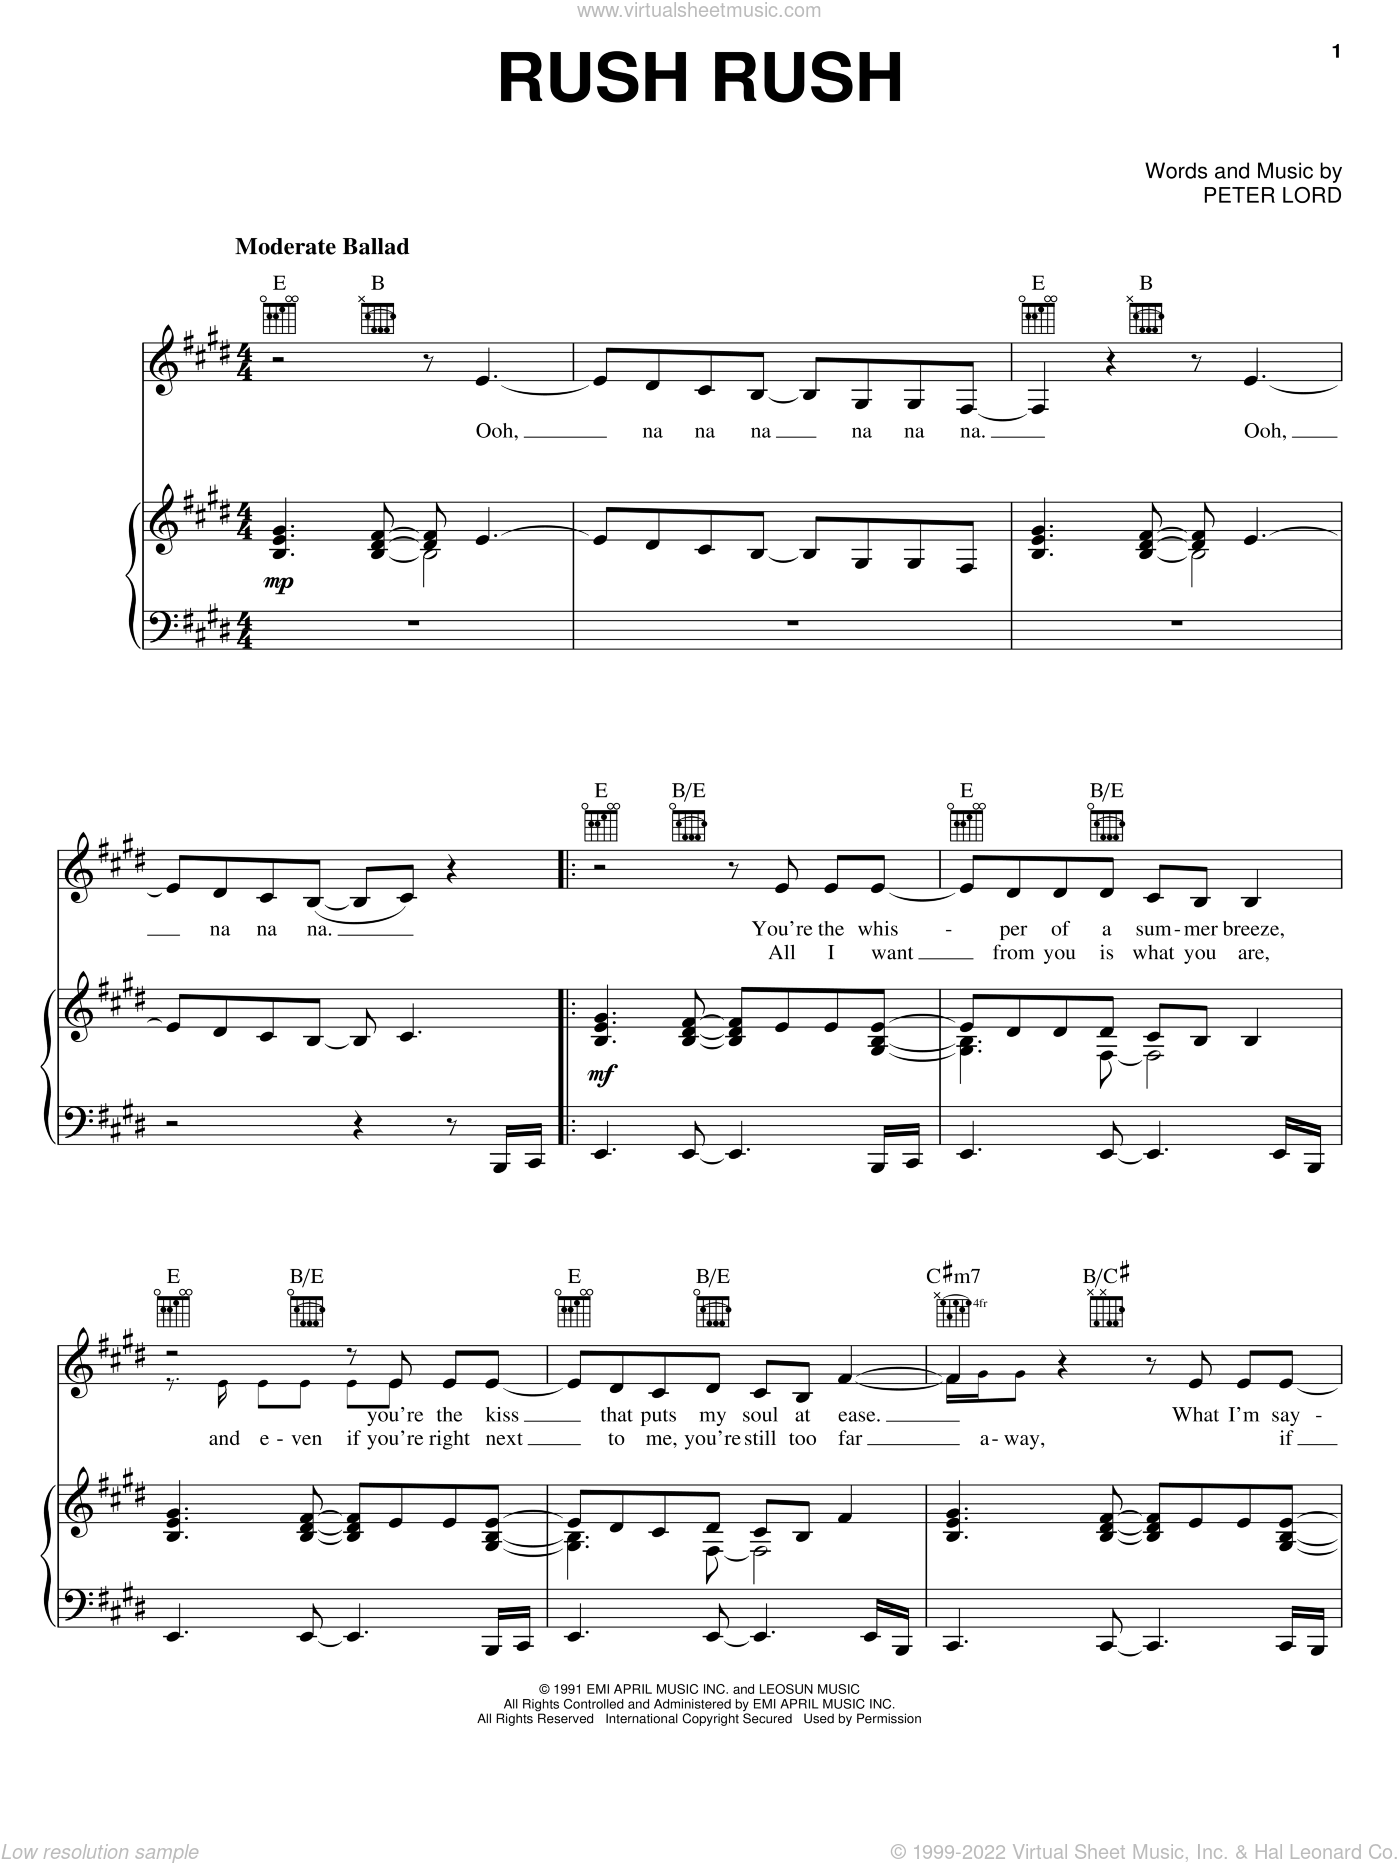 Rush E Piano Notes / Rush Sheet Music Free Download In Pdf Or Midi On